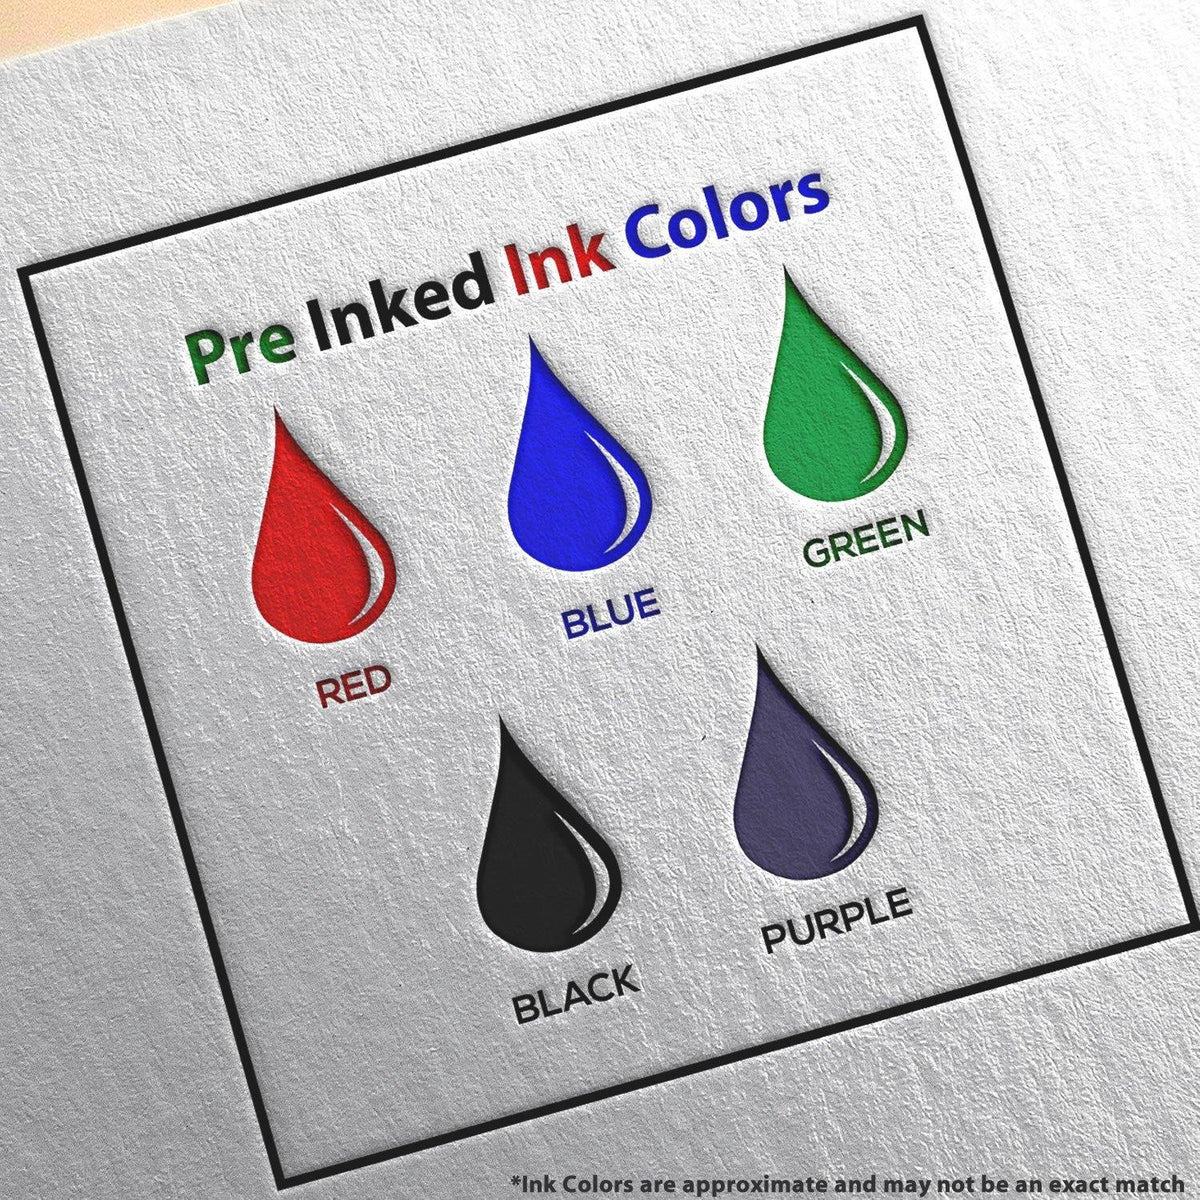 Slim Pre Inked Lets Review This Stamp Ink Color Options